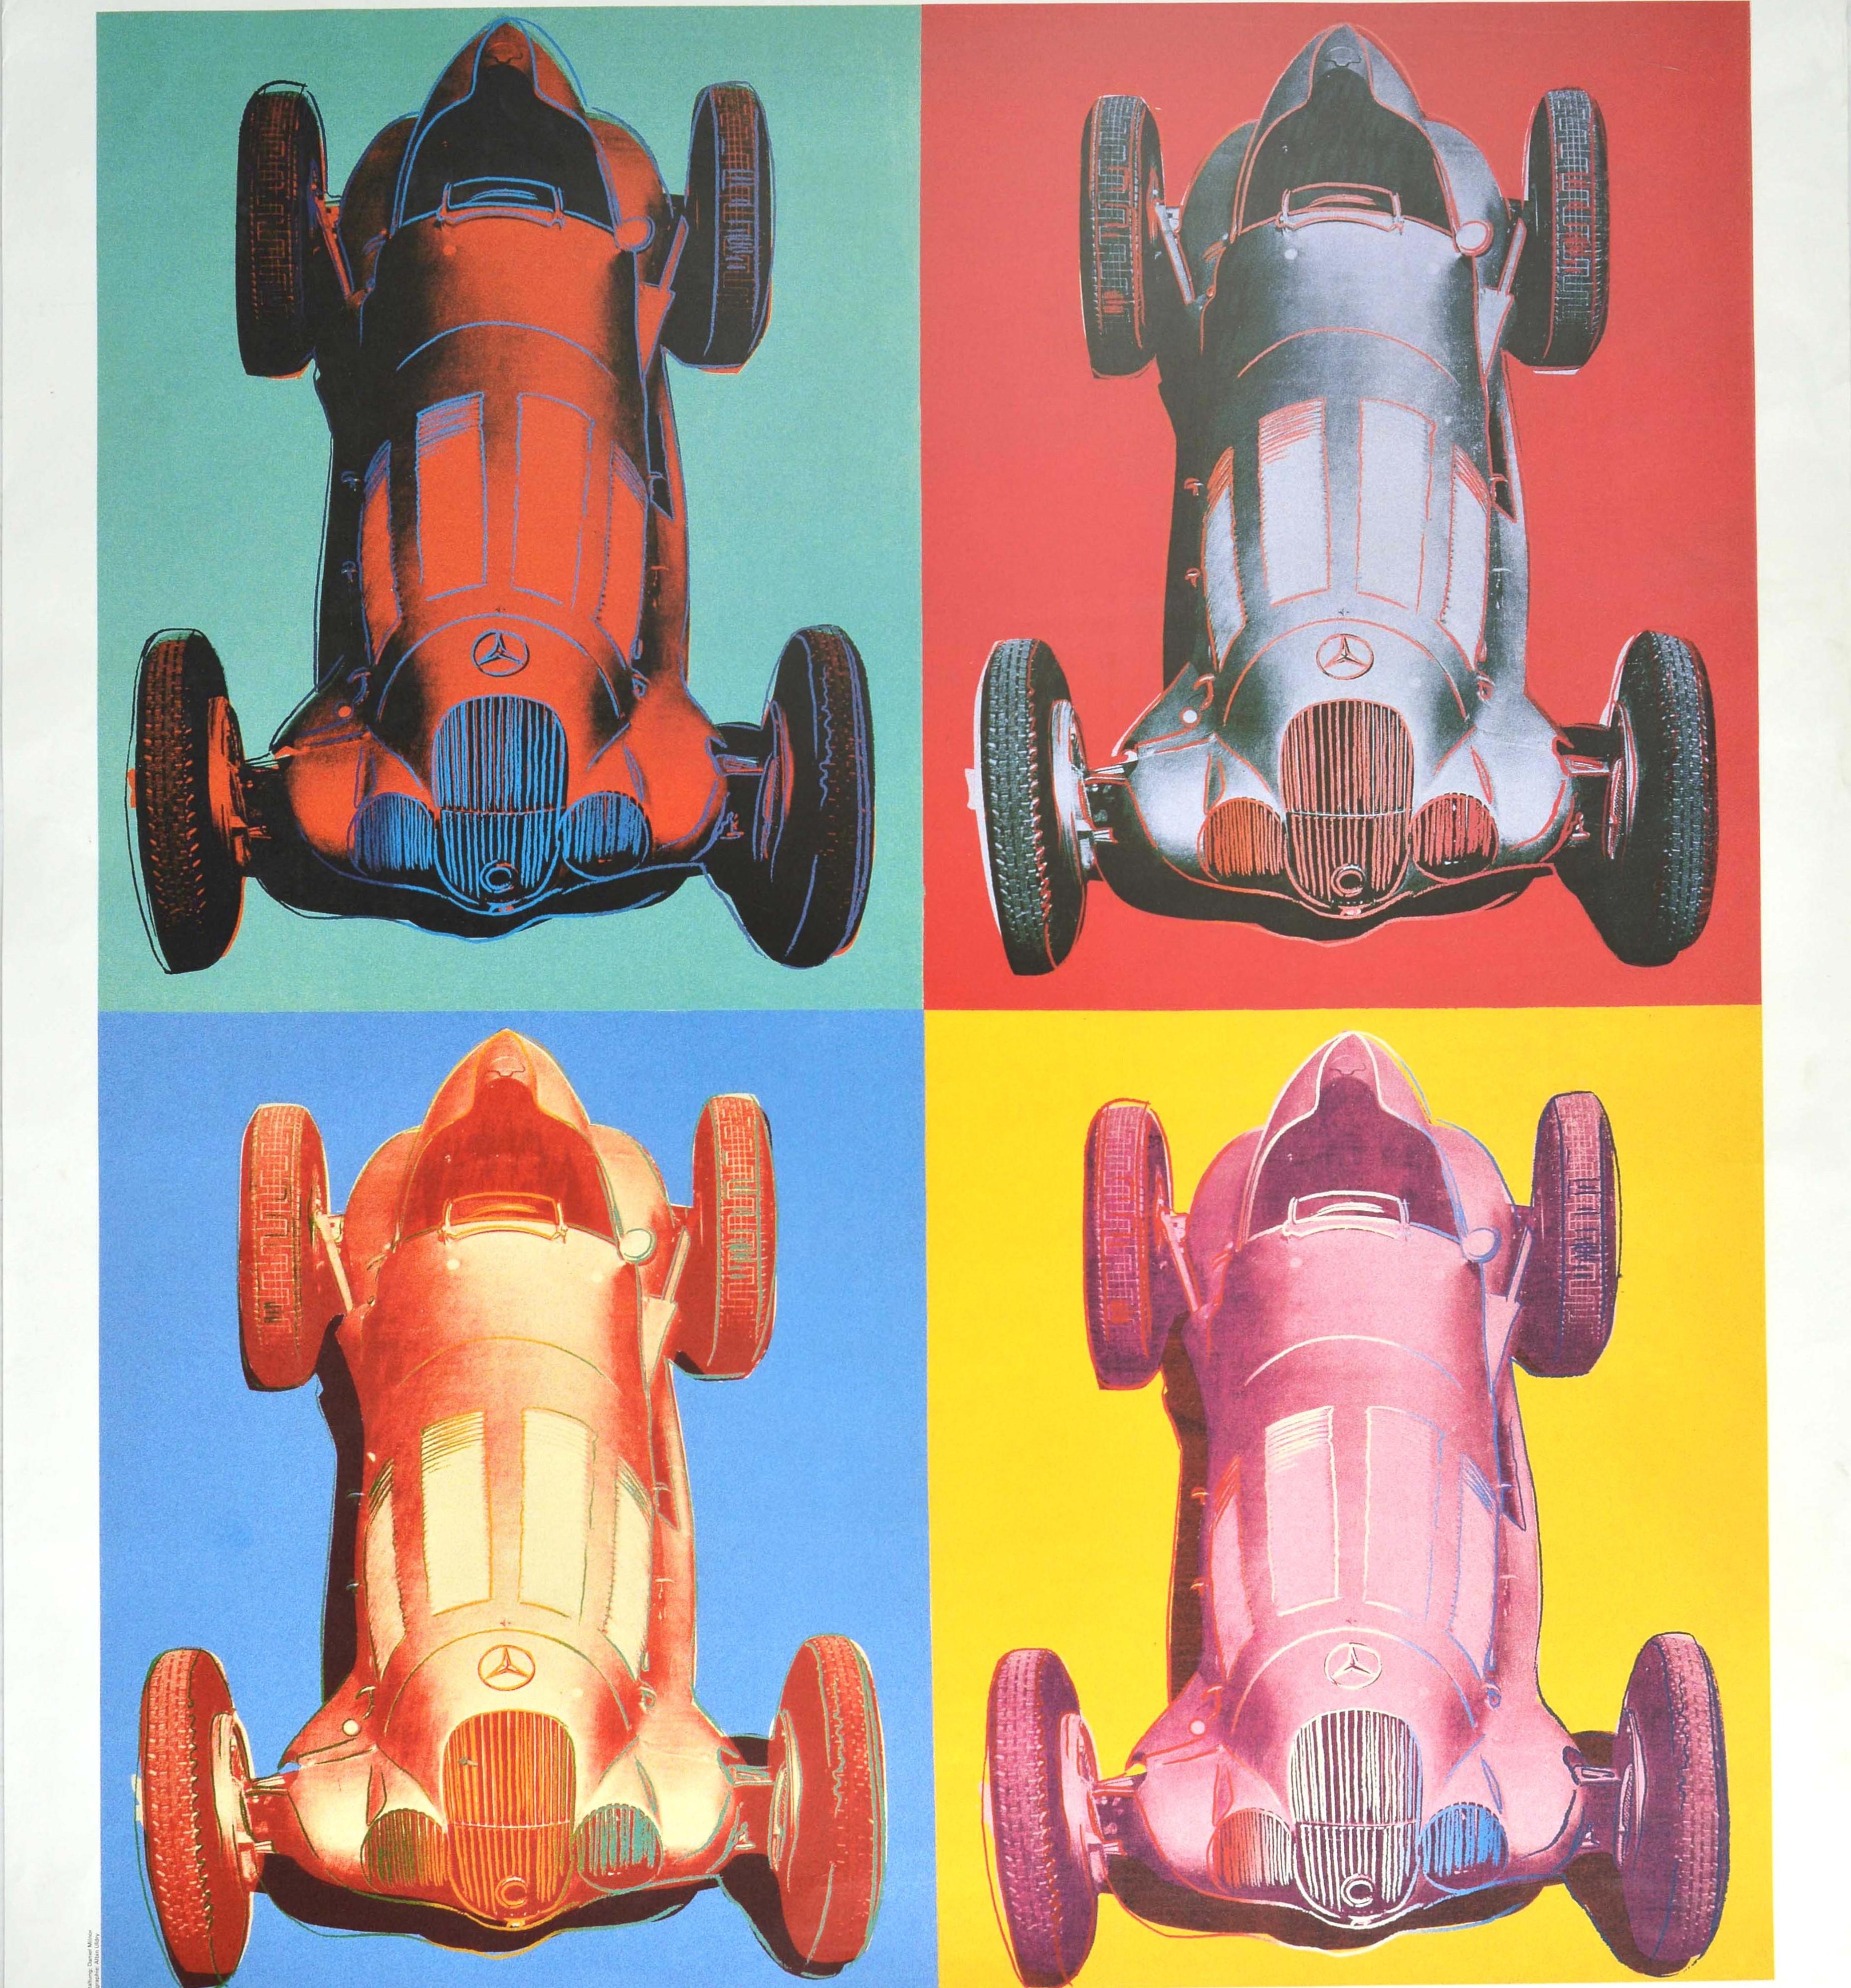 Original vintage advertising poster for an exhibition of Andy Warhol Cars at the Kunstmuseum Bern from 2 March to 29 April 1990 on loan from the collection of Daimler Benz featuring a colourful iconic design by the notable American pop artist Andy